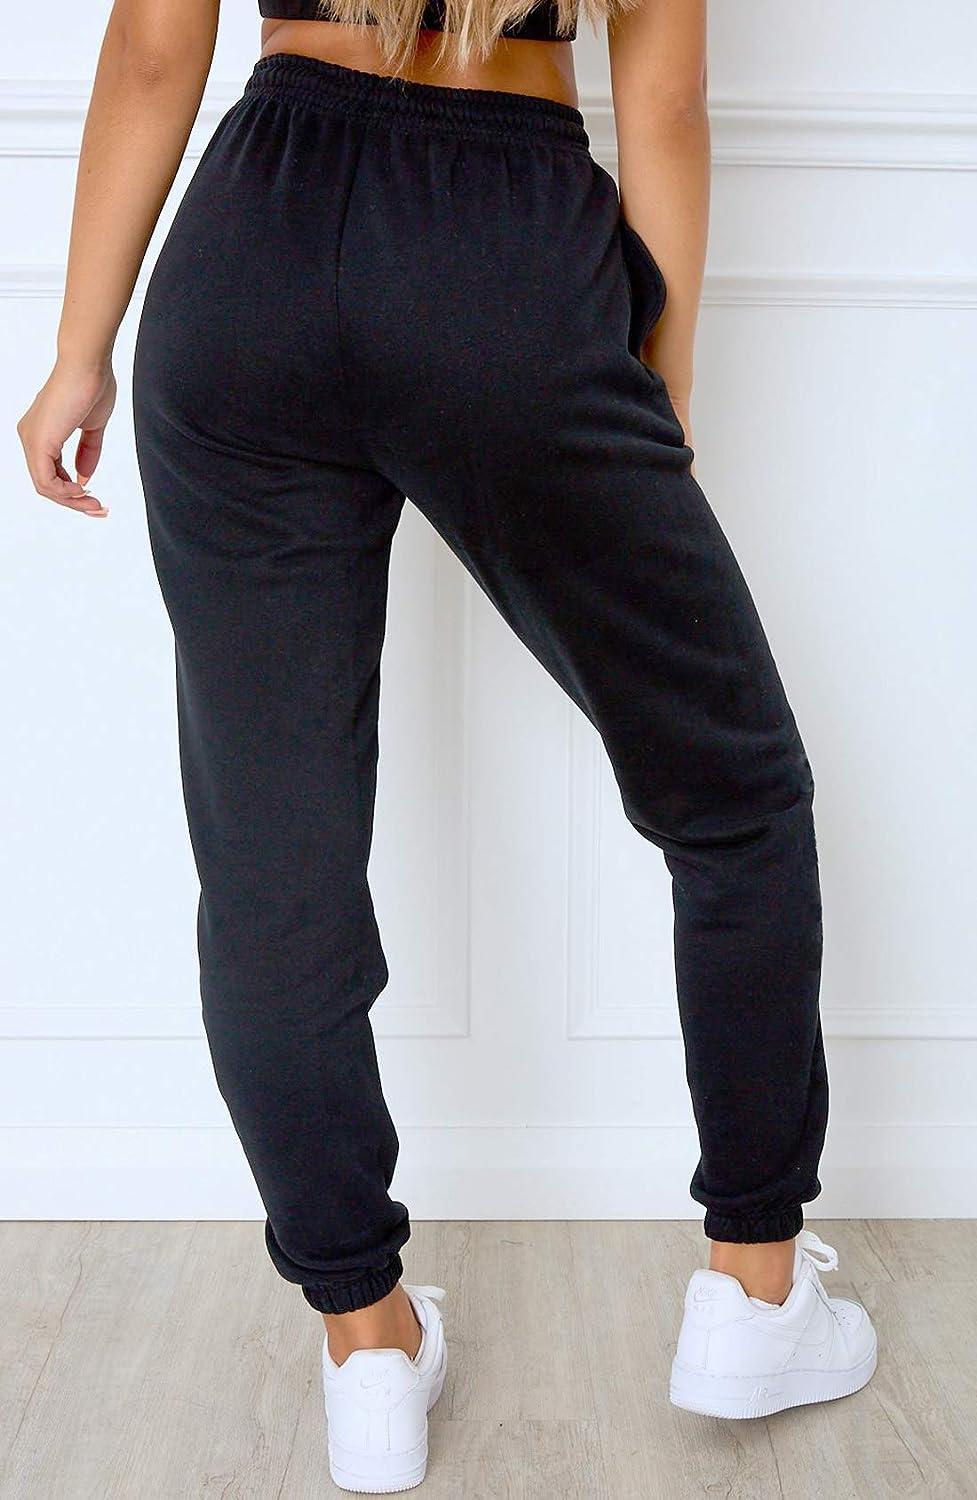 Womens Comfy Joggers Sweatpants Drawstring Cinched Bottom Elastic Waist  Ankle Length Sports Wear Running Pants 